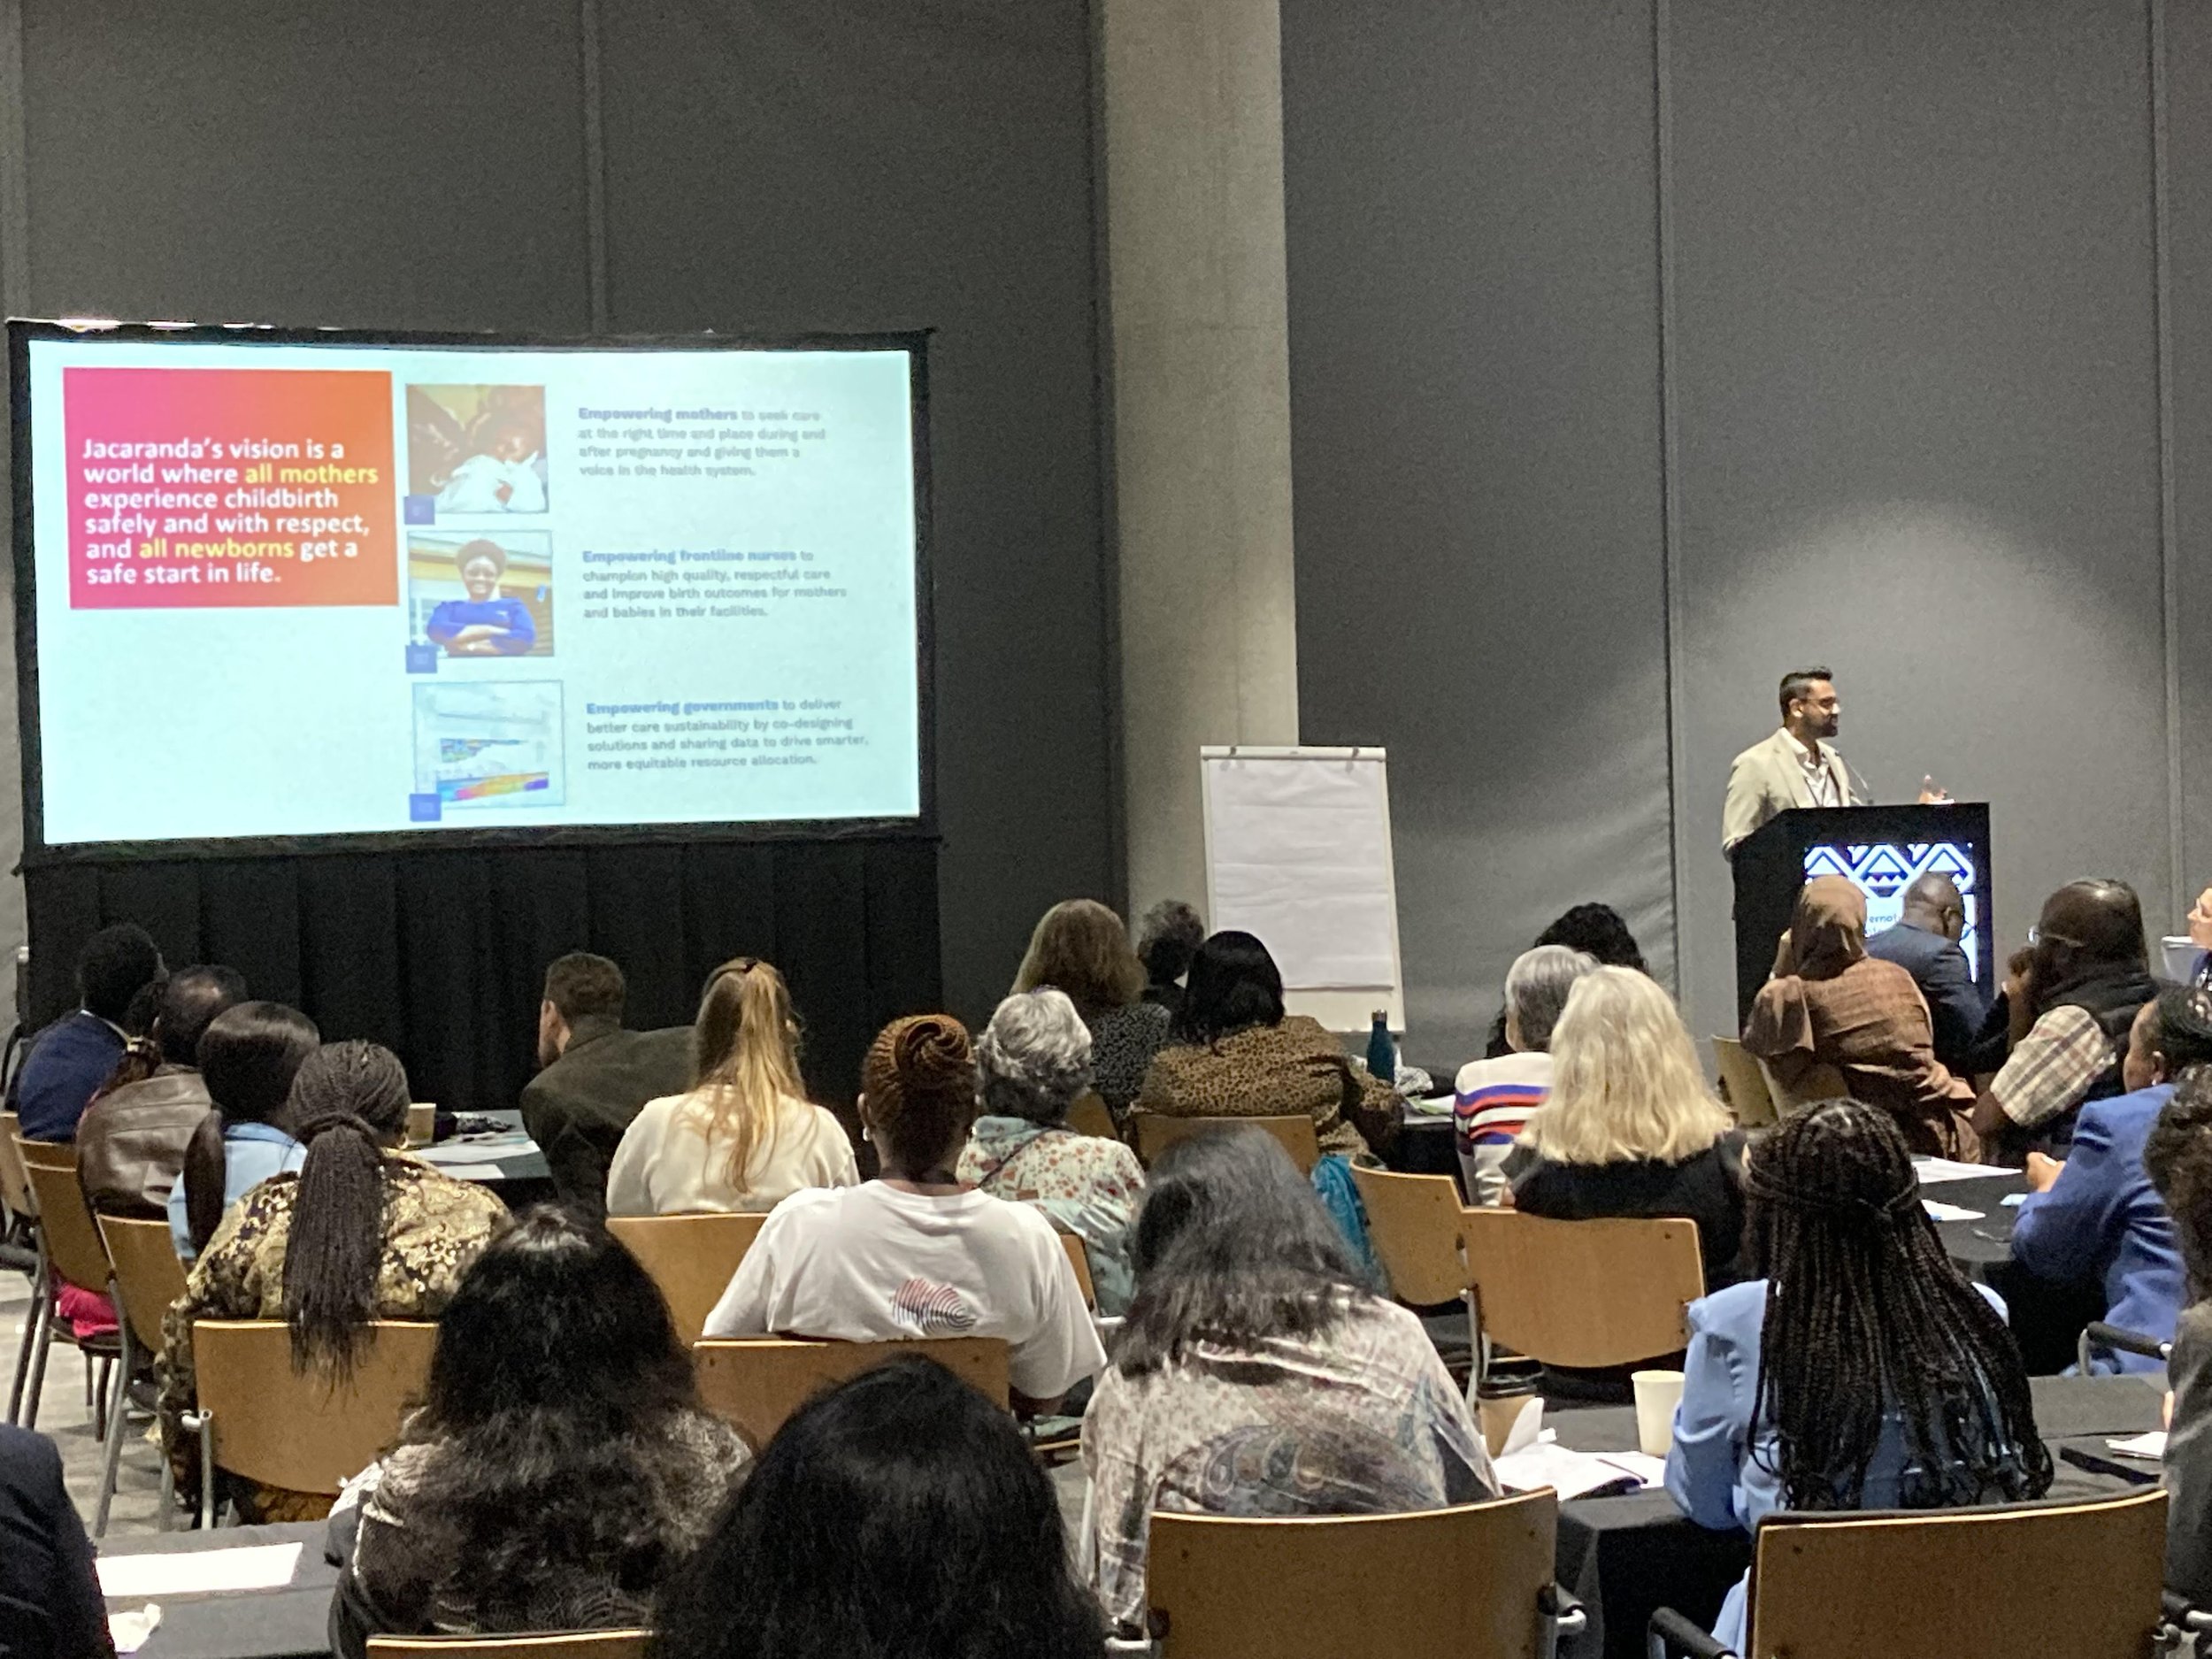 Co-Executive Director Sathy Rajasekharan presents on SDR along with panelists Caitlin Dolkart, Keith Cloete, and Dr. Sunday Dominico on the first day of IMNHC2023 in Cape Town.